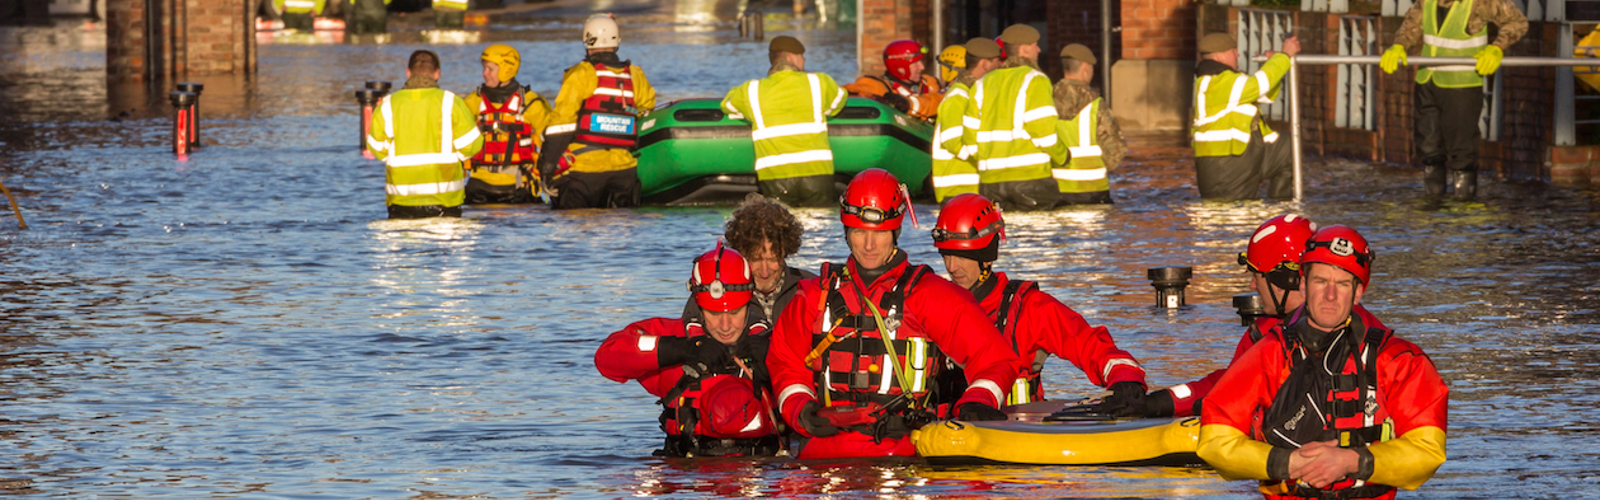 Flood rescue by the British Army and the Mountain Rescue at Queens Staith Road near the Ouse Bridge in York City Centre after heavy rain, on 27 December 2015